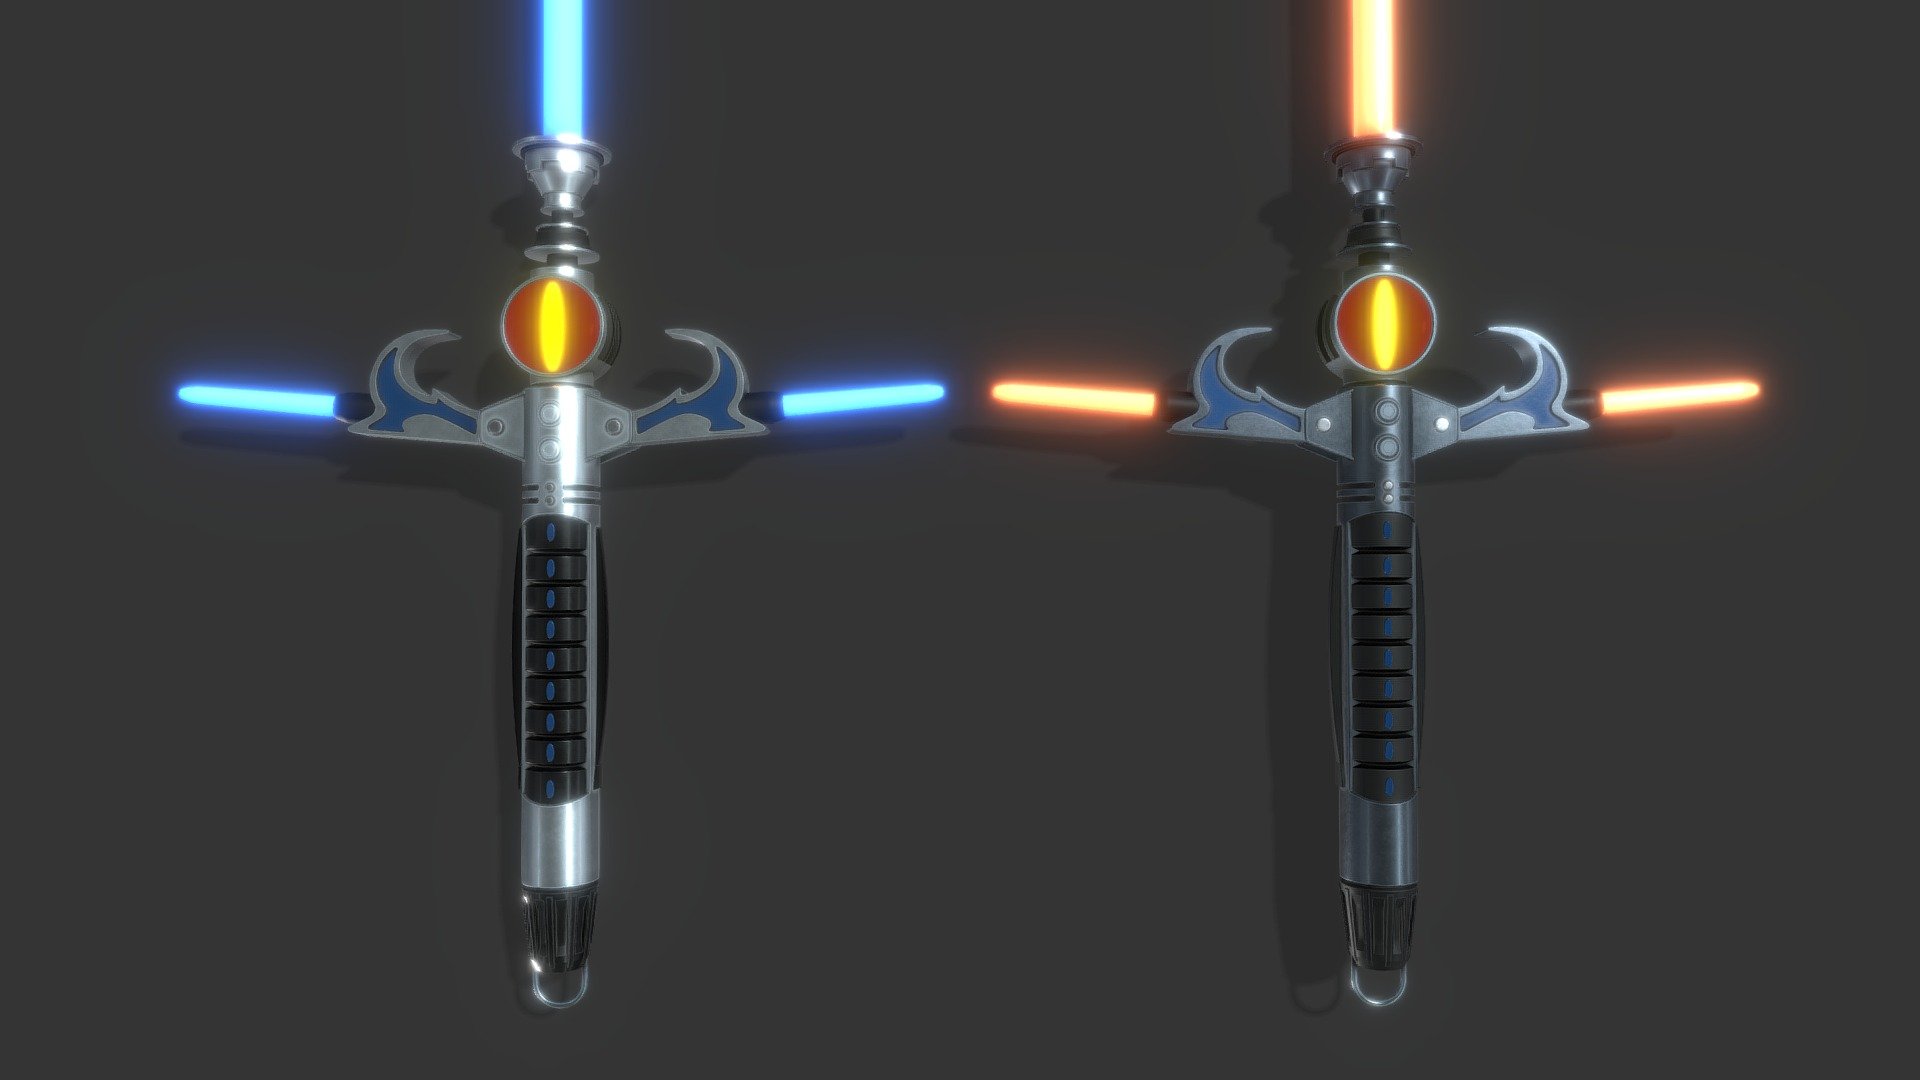 My take on what a Sword of Omens might look like as a Lightsaber.

Better renders here https://www.artstation.com/artwork/xDBgQ2

I haven't used the proper symbol just the eye part. 

Two versions. Light metal and dark metal.

Blades are just for show but I have included a model with them attached if wanted 3d model